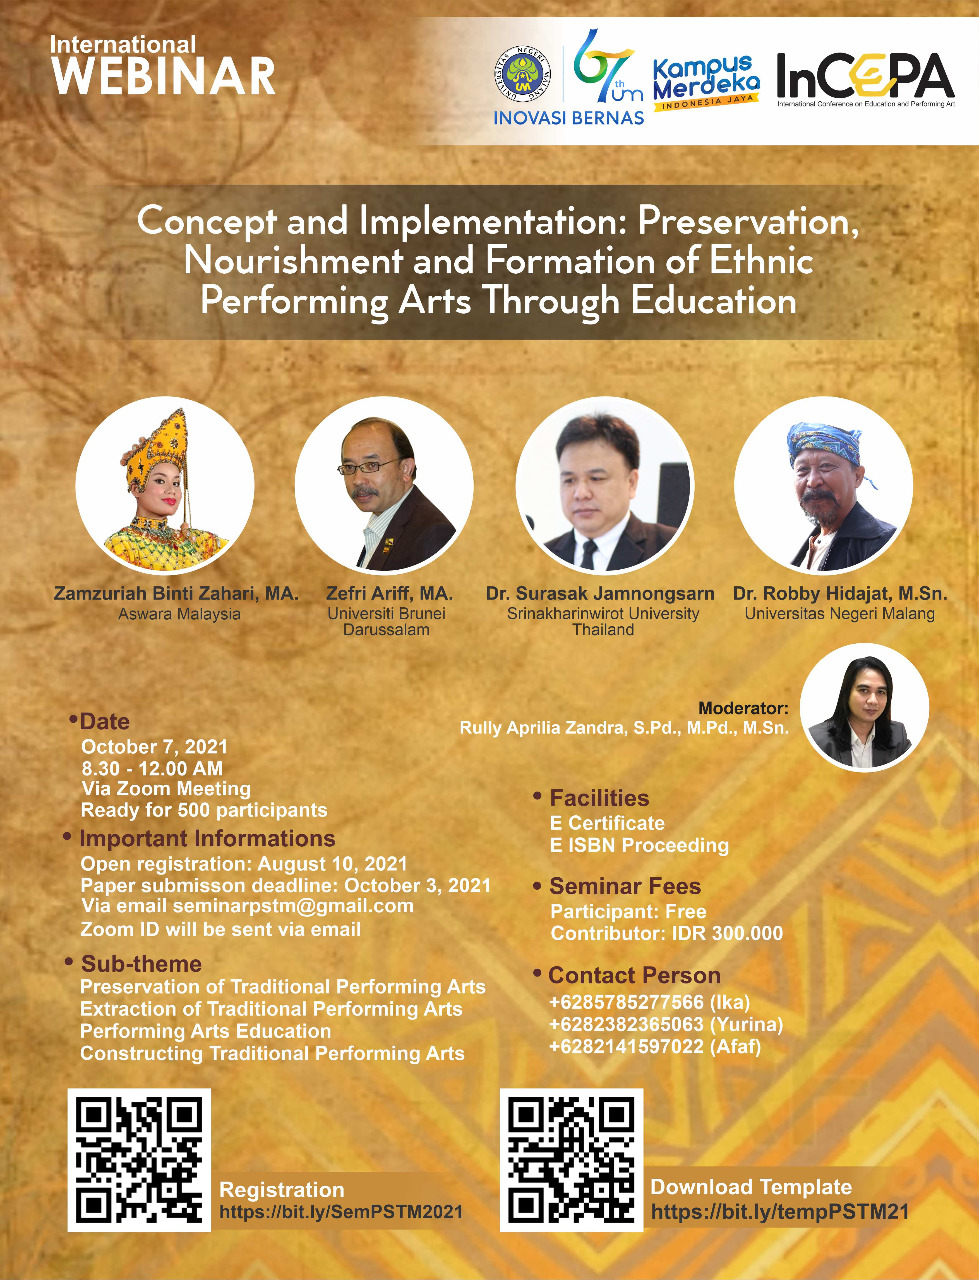 International Conference on Education and Performing Art (INCEPA) 2021